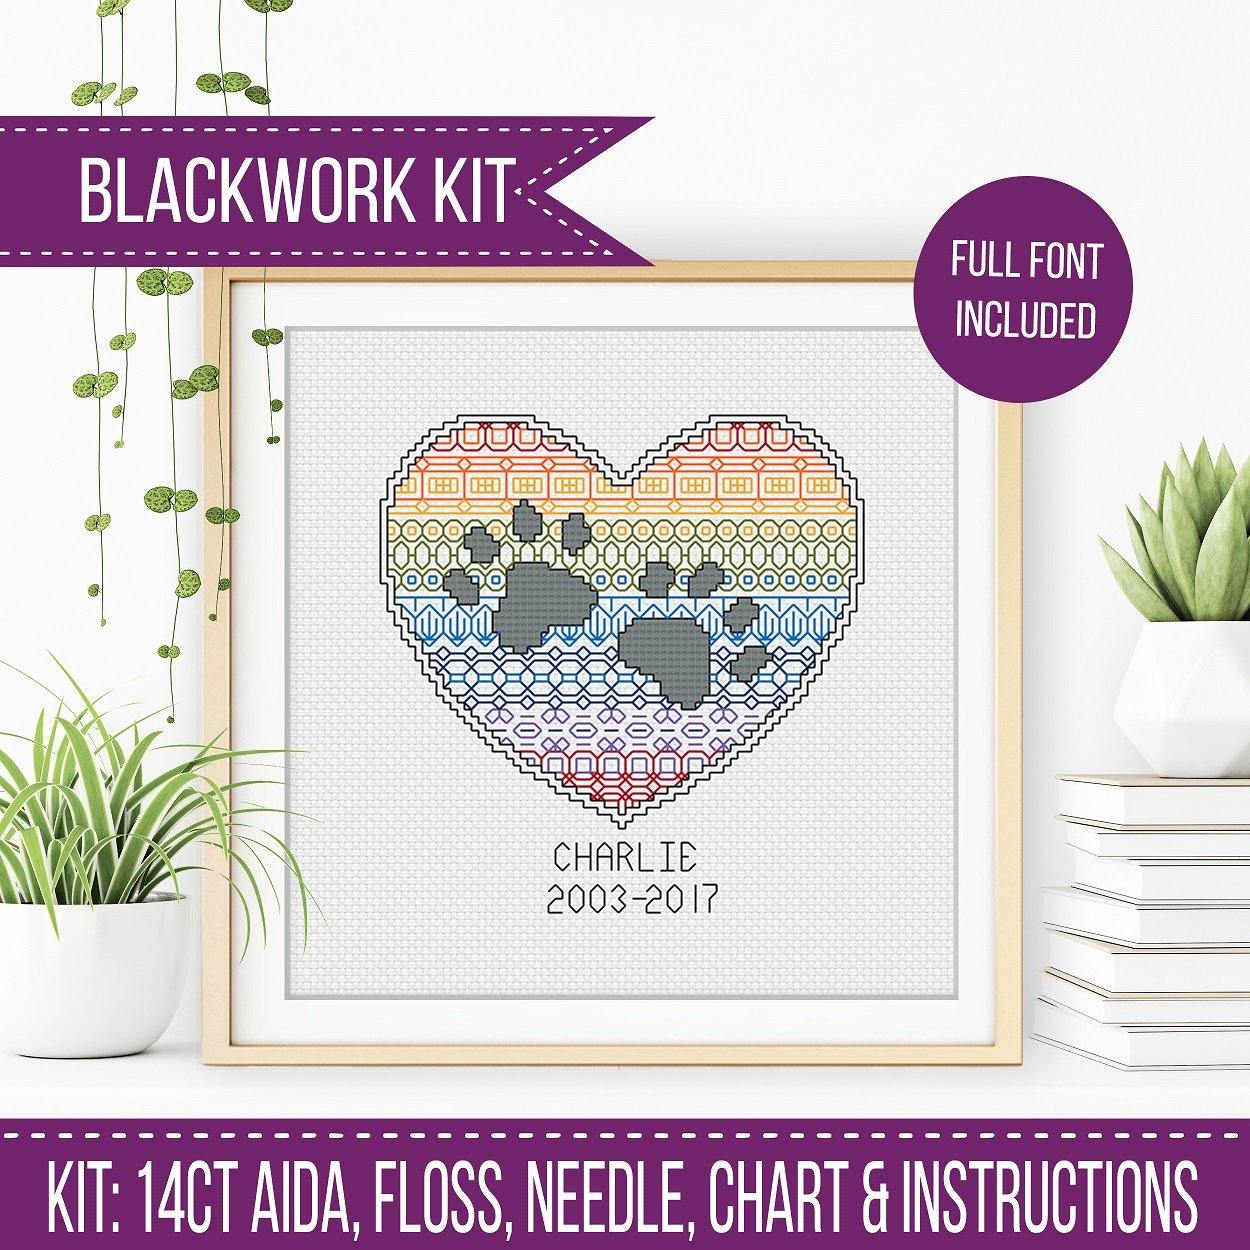 Paws on Your Heart Kit - Blackwork Patterns & Cross Stitch by Peppermint Purple